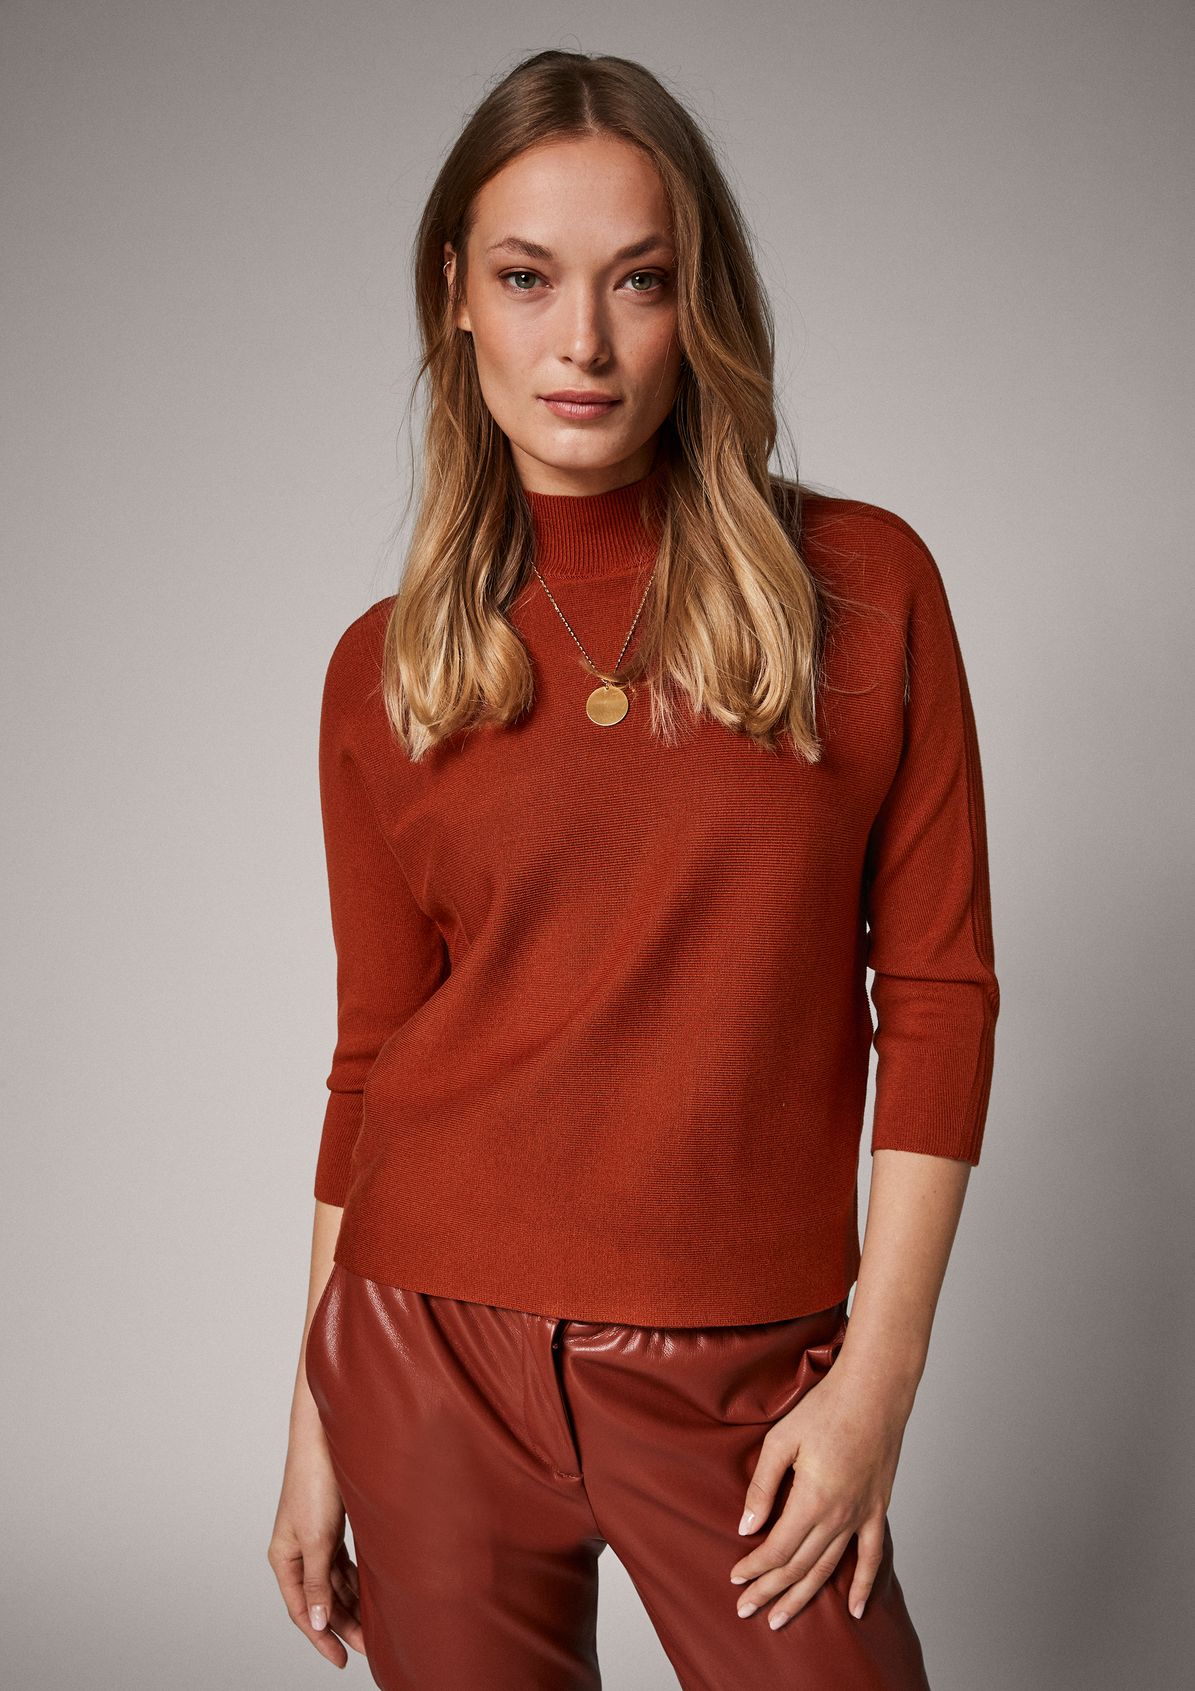 Striped jumper with 3/4-length sleeves from comma